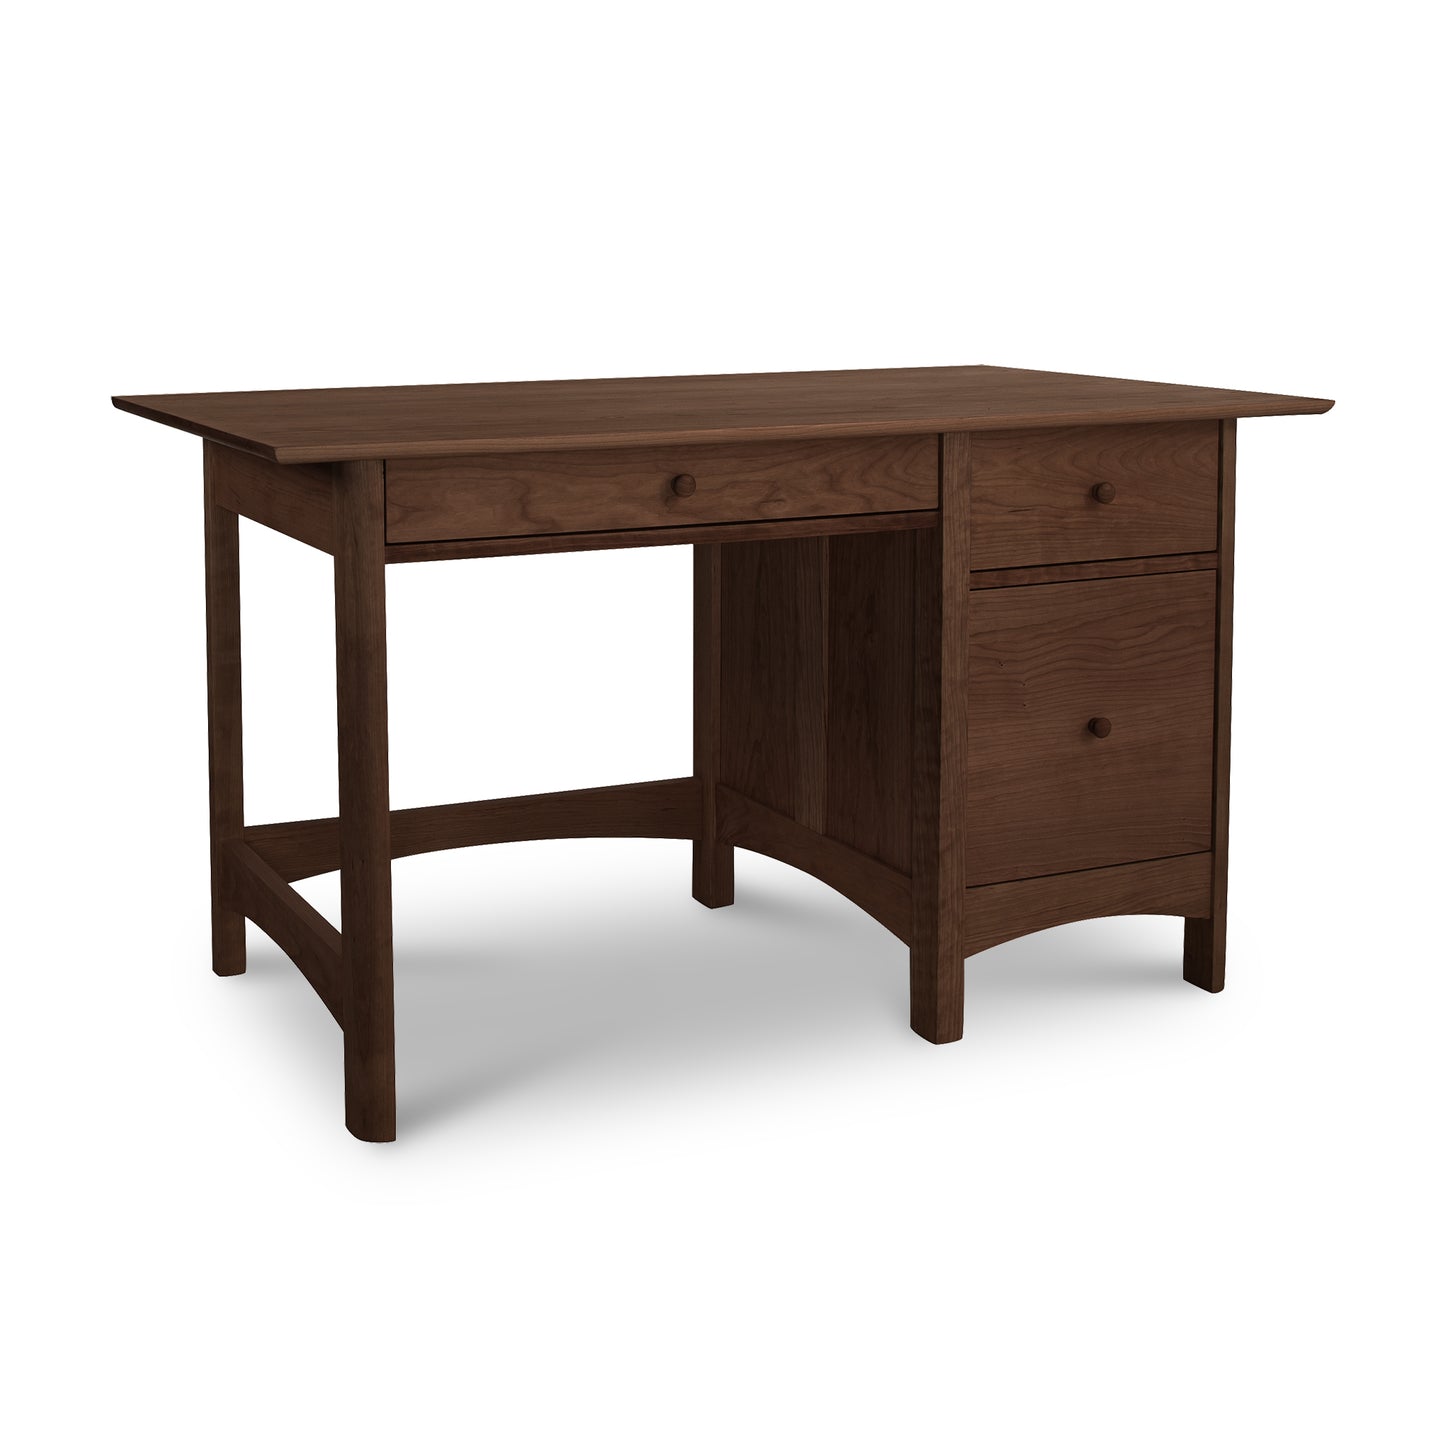 Vermont Furniture Designs Heartwood Shaker Study Desk with two drawers on one side, isolated on a white background.